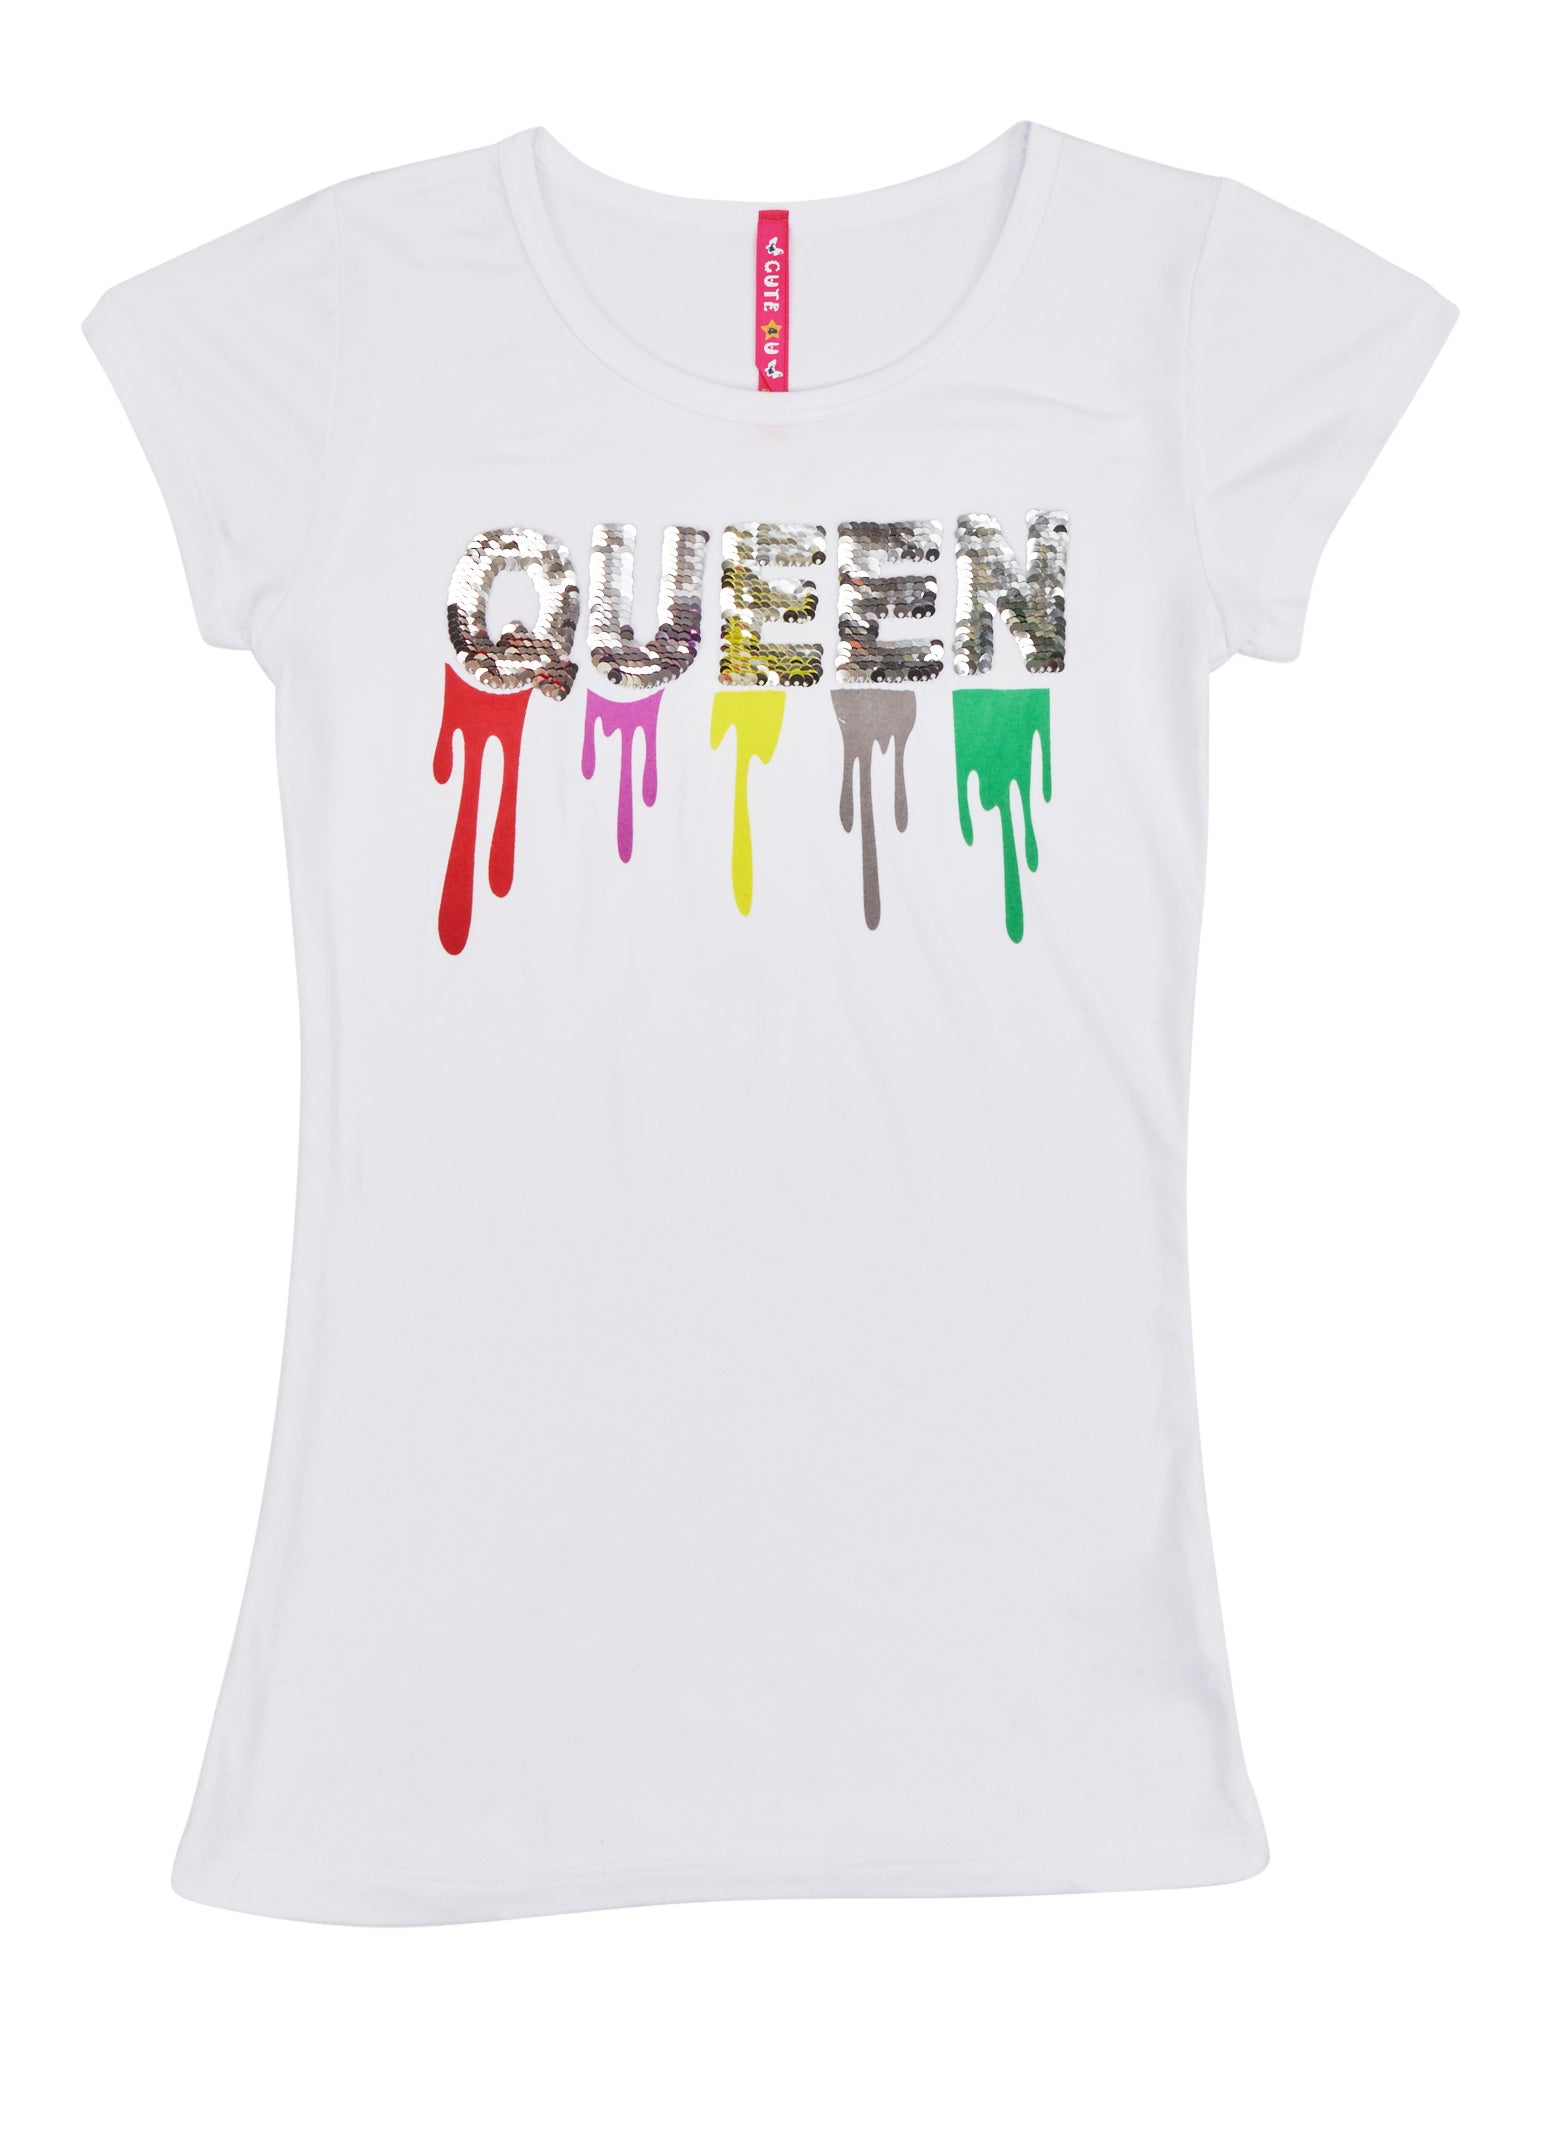 Girls Queen Reversible Sequin Patch Graphic Tee, White, Size 14-16